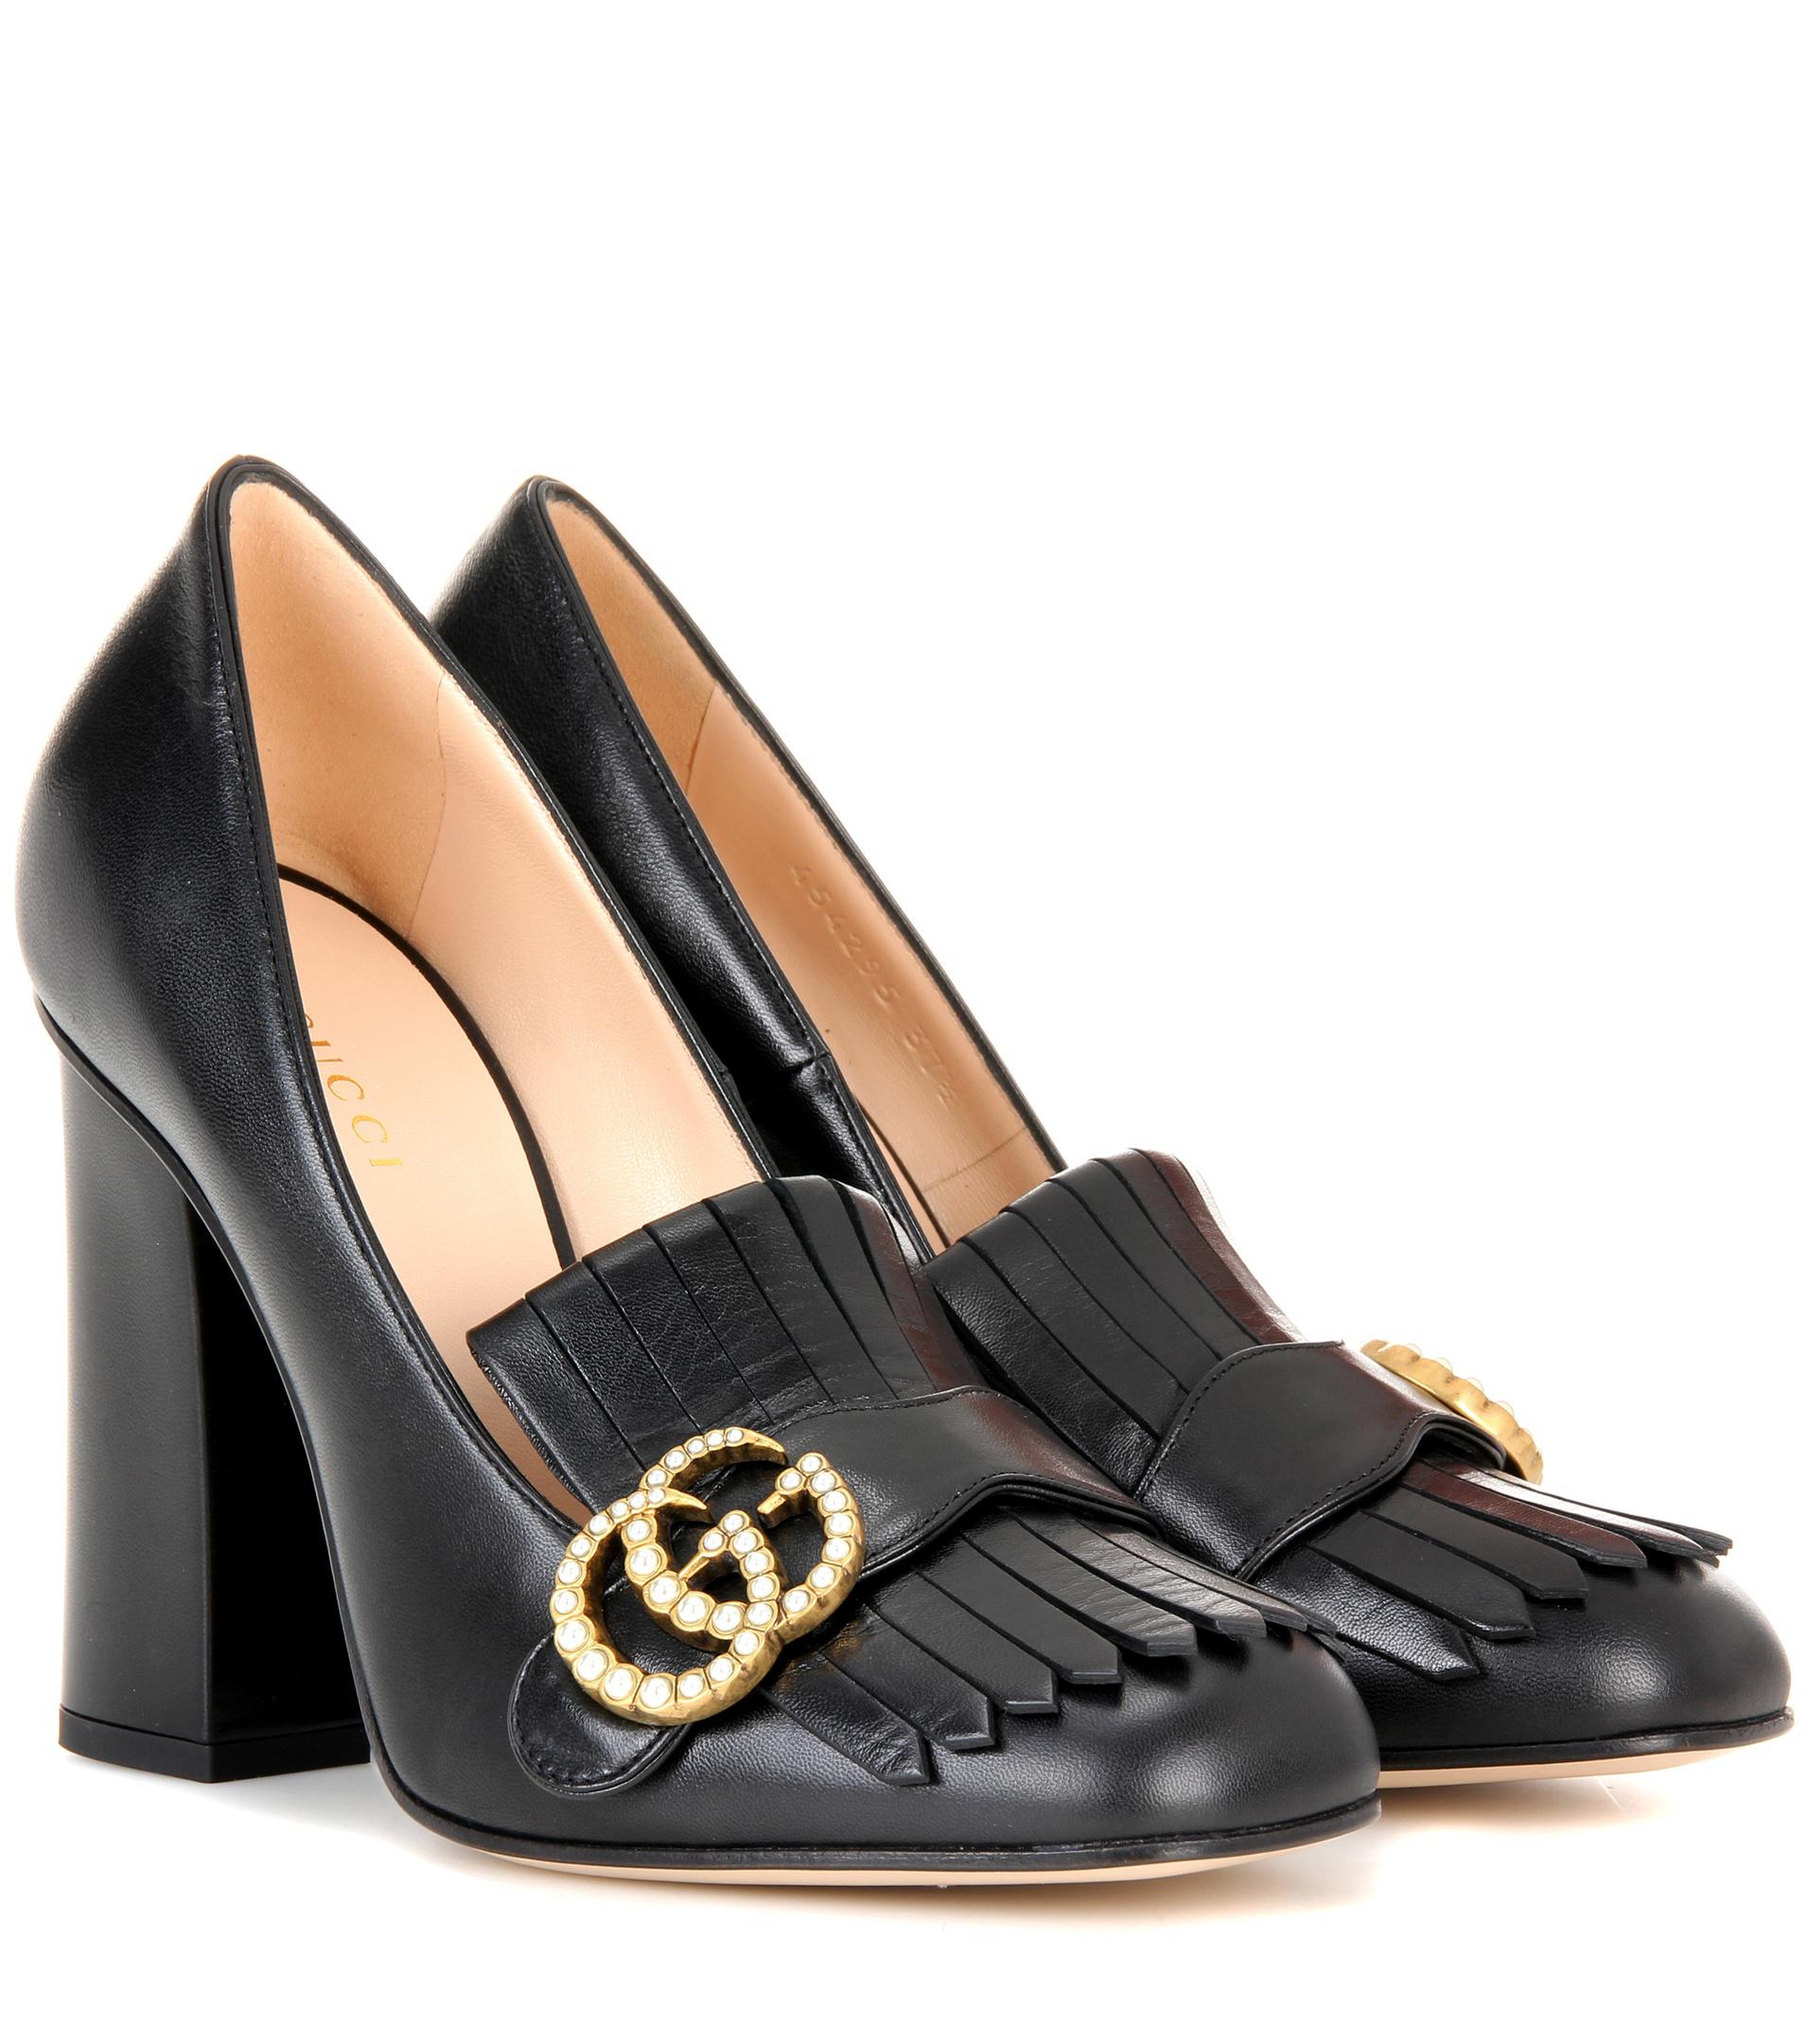 Gucci Leather Loafer Pumps in Black - Lyst